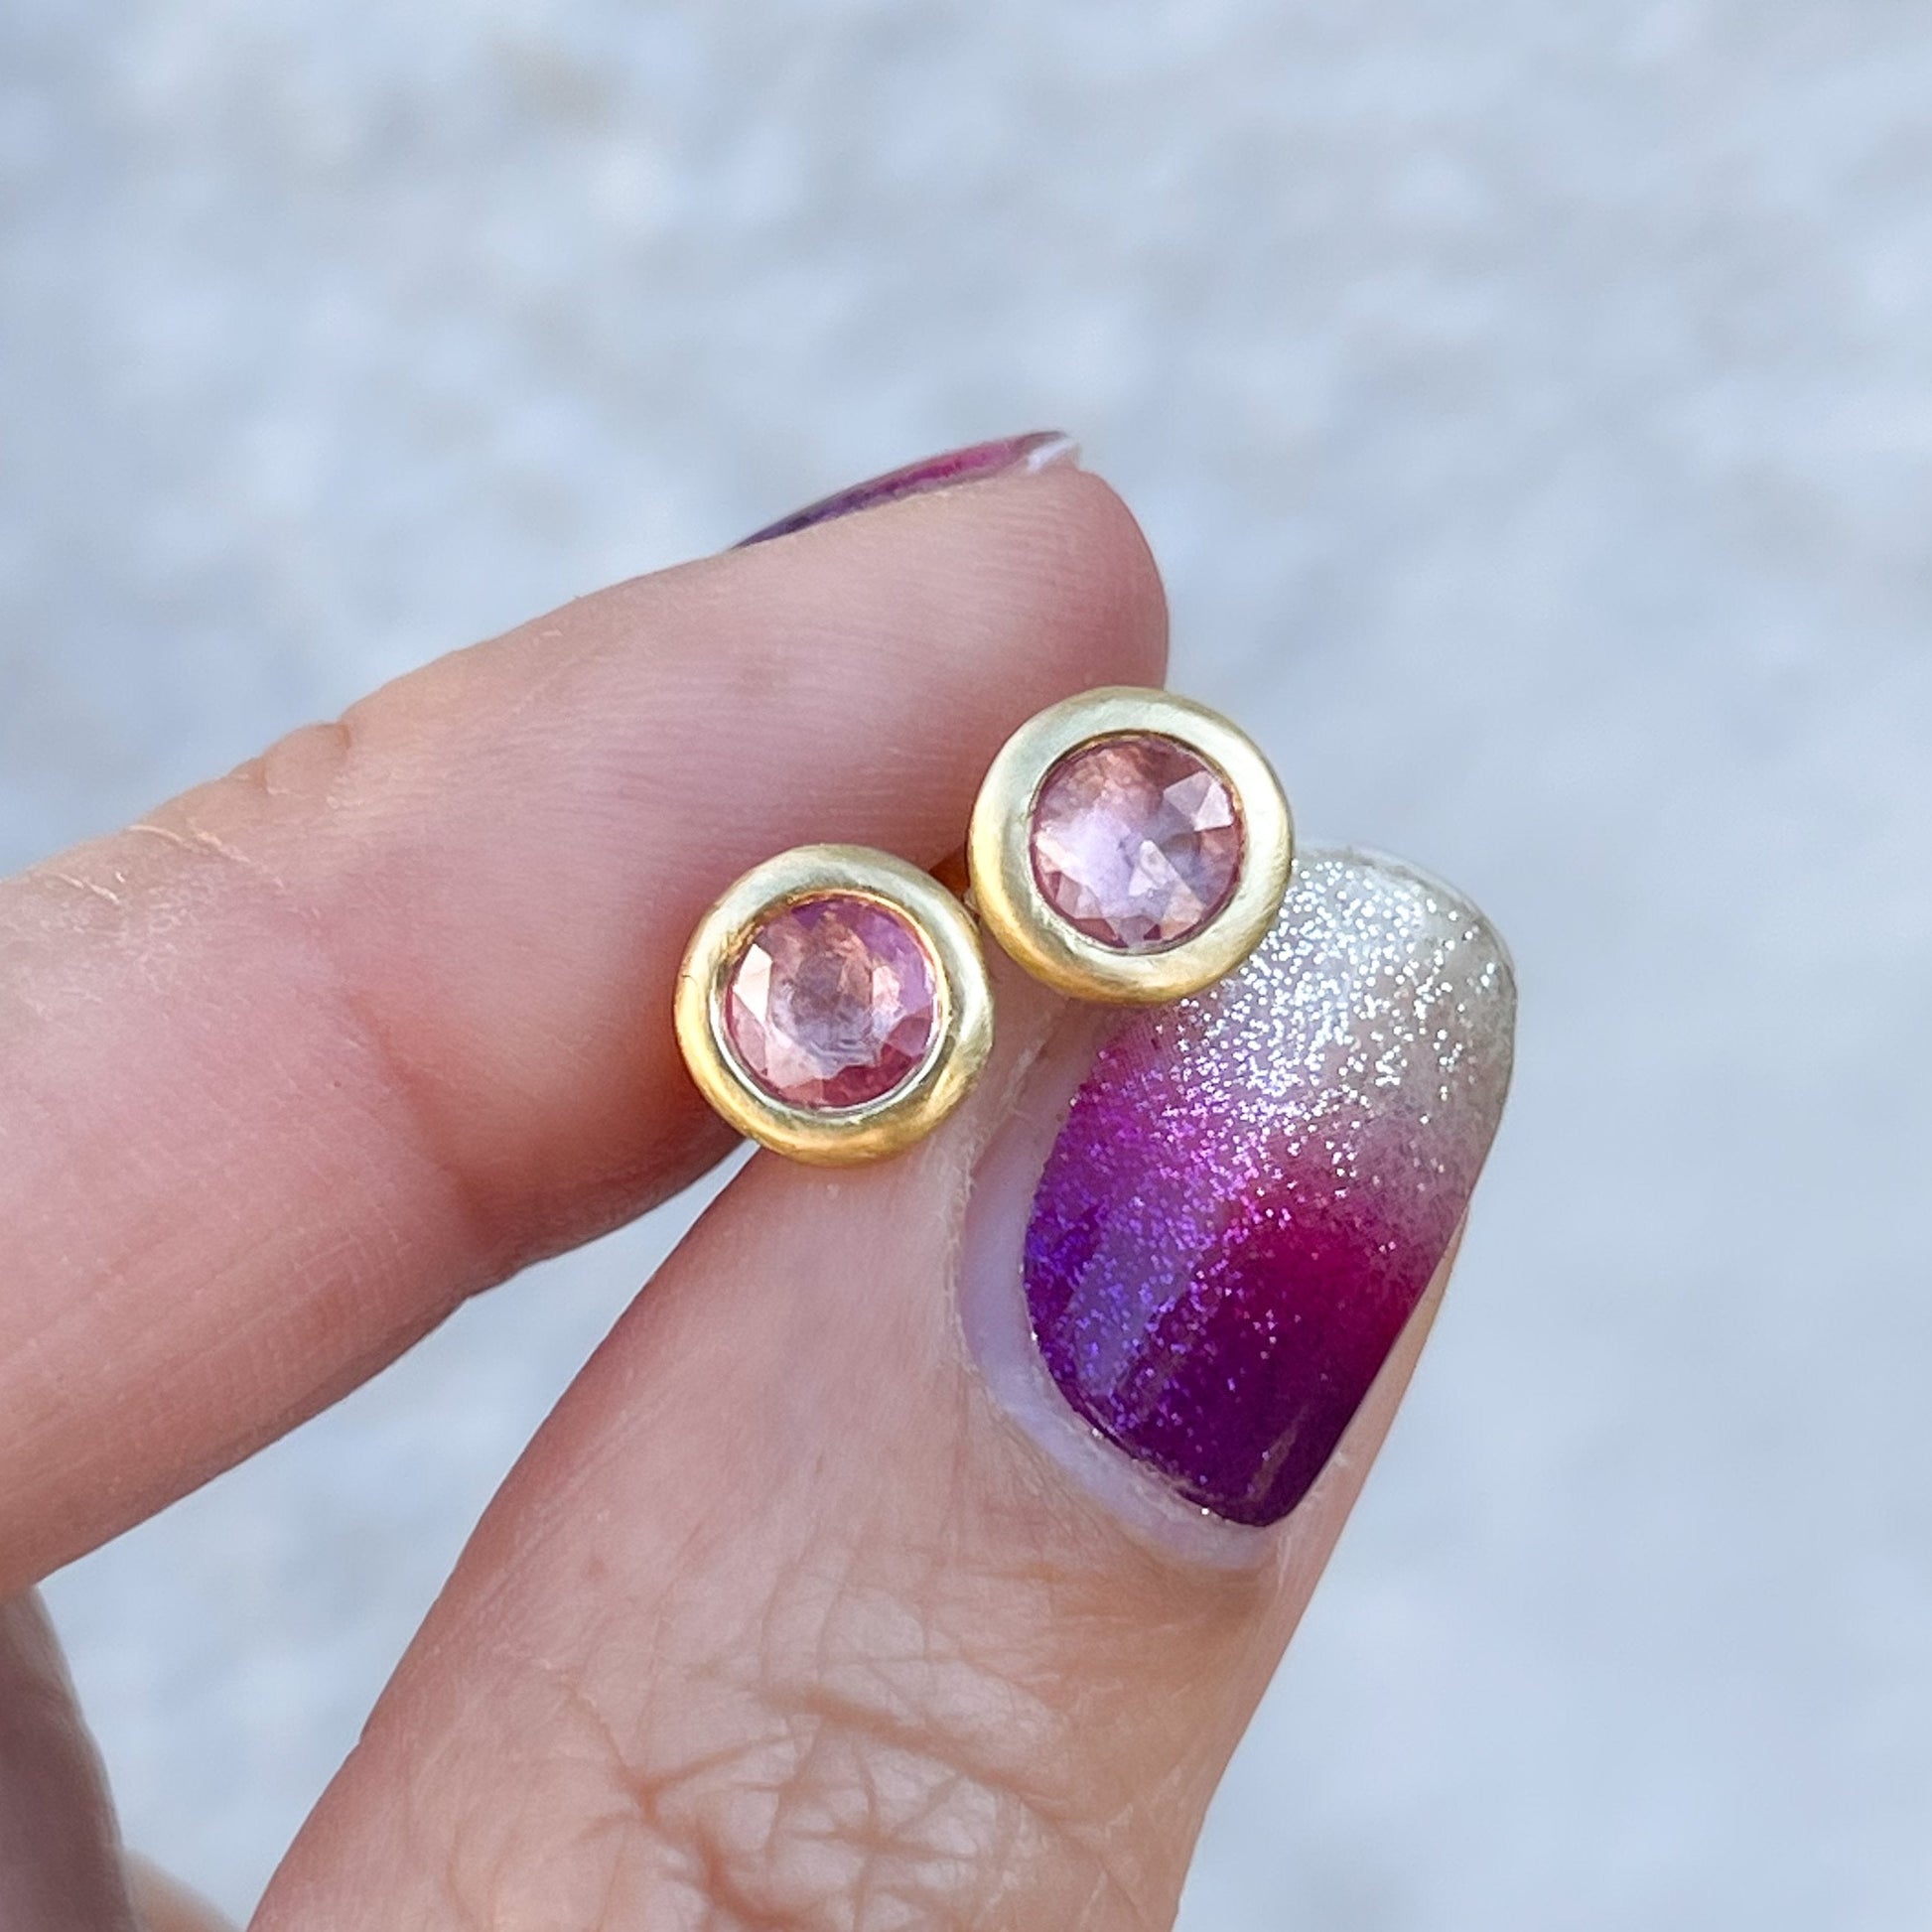 Pink sapphire studs by NIXIN Jewelry held in shade